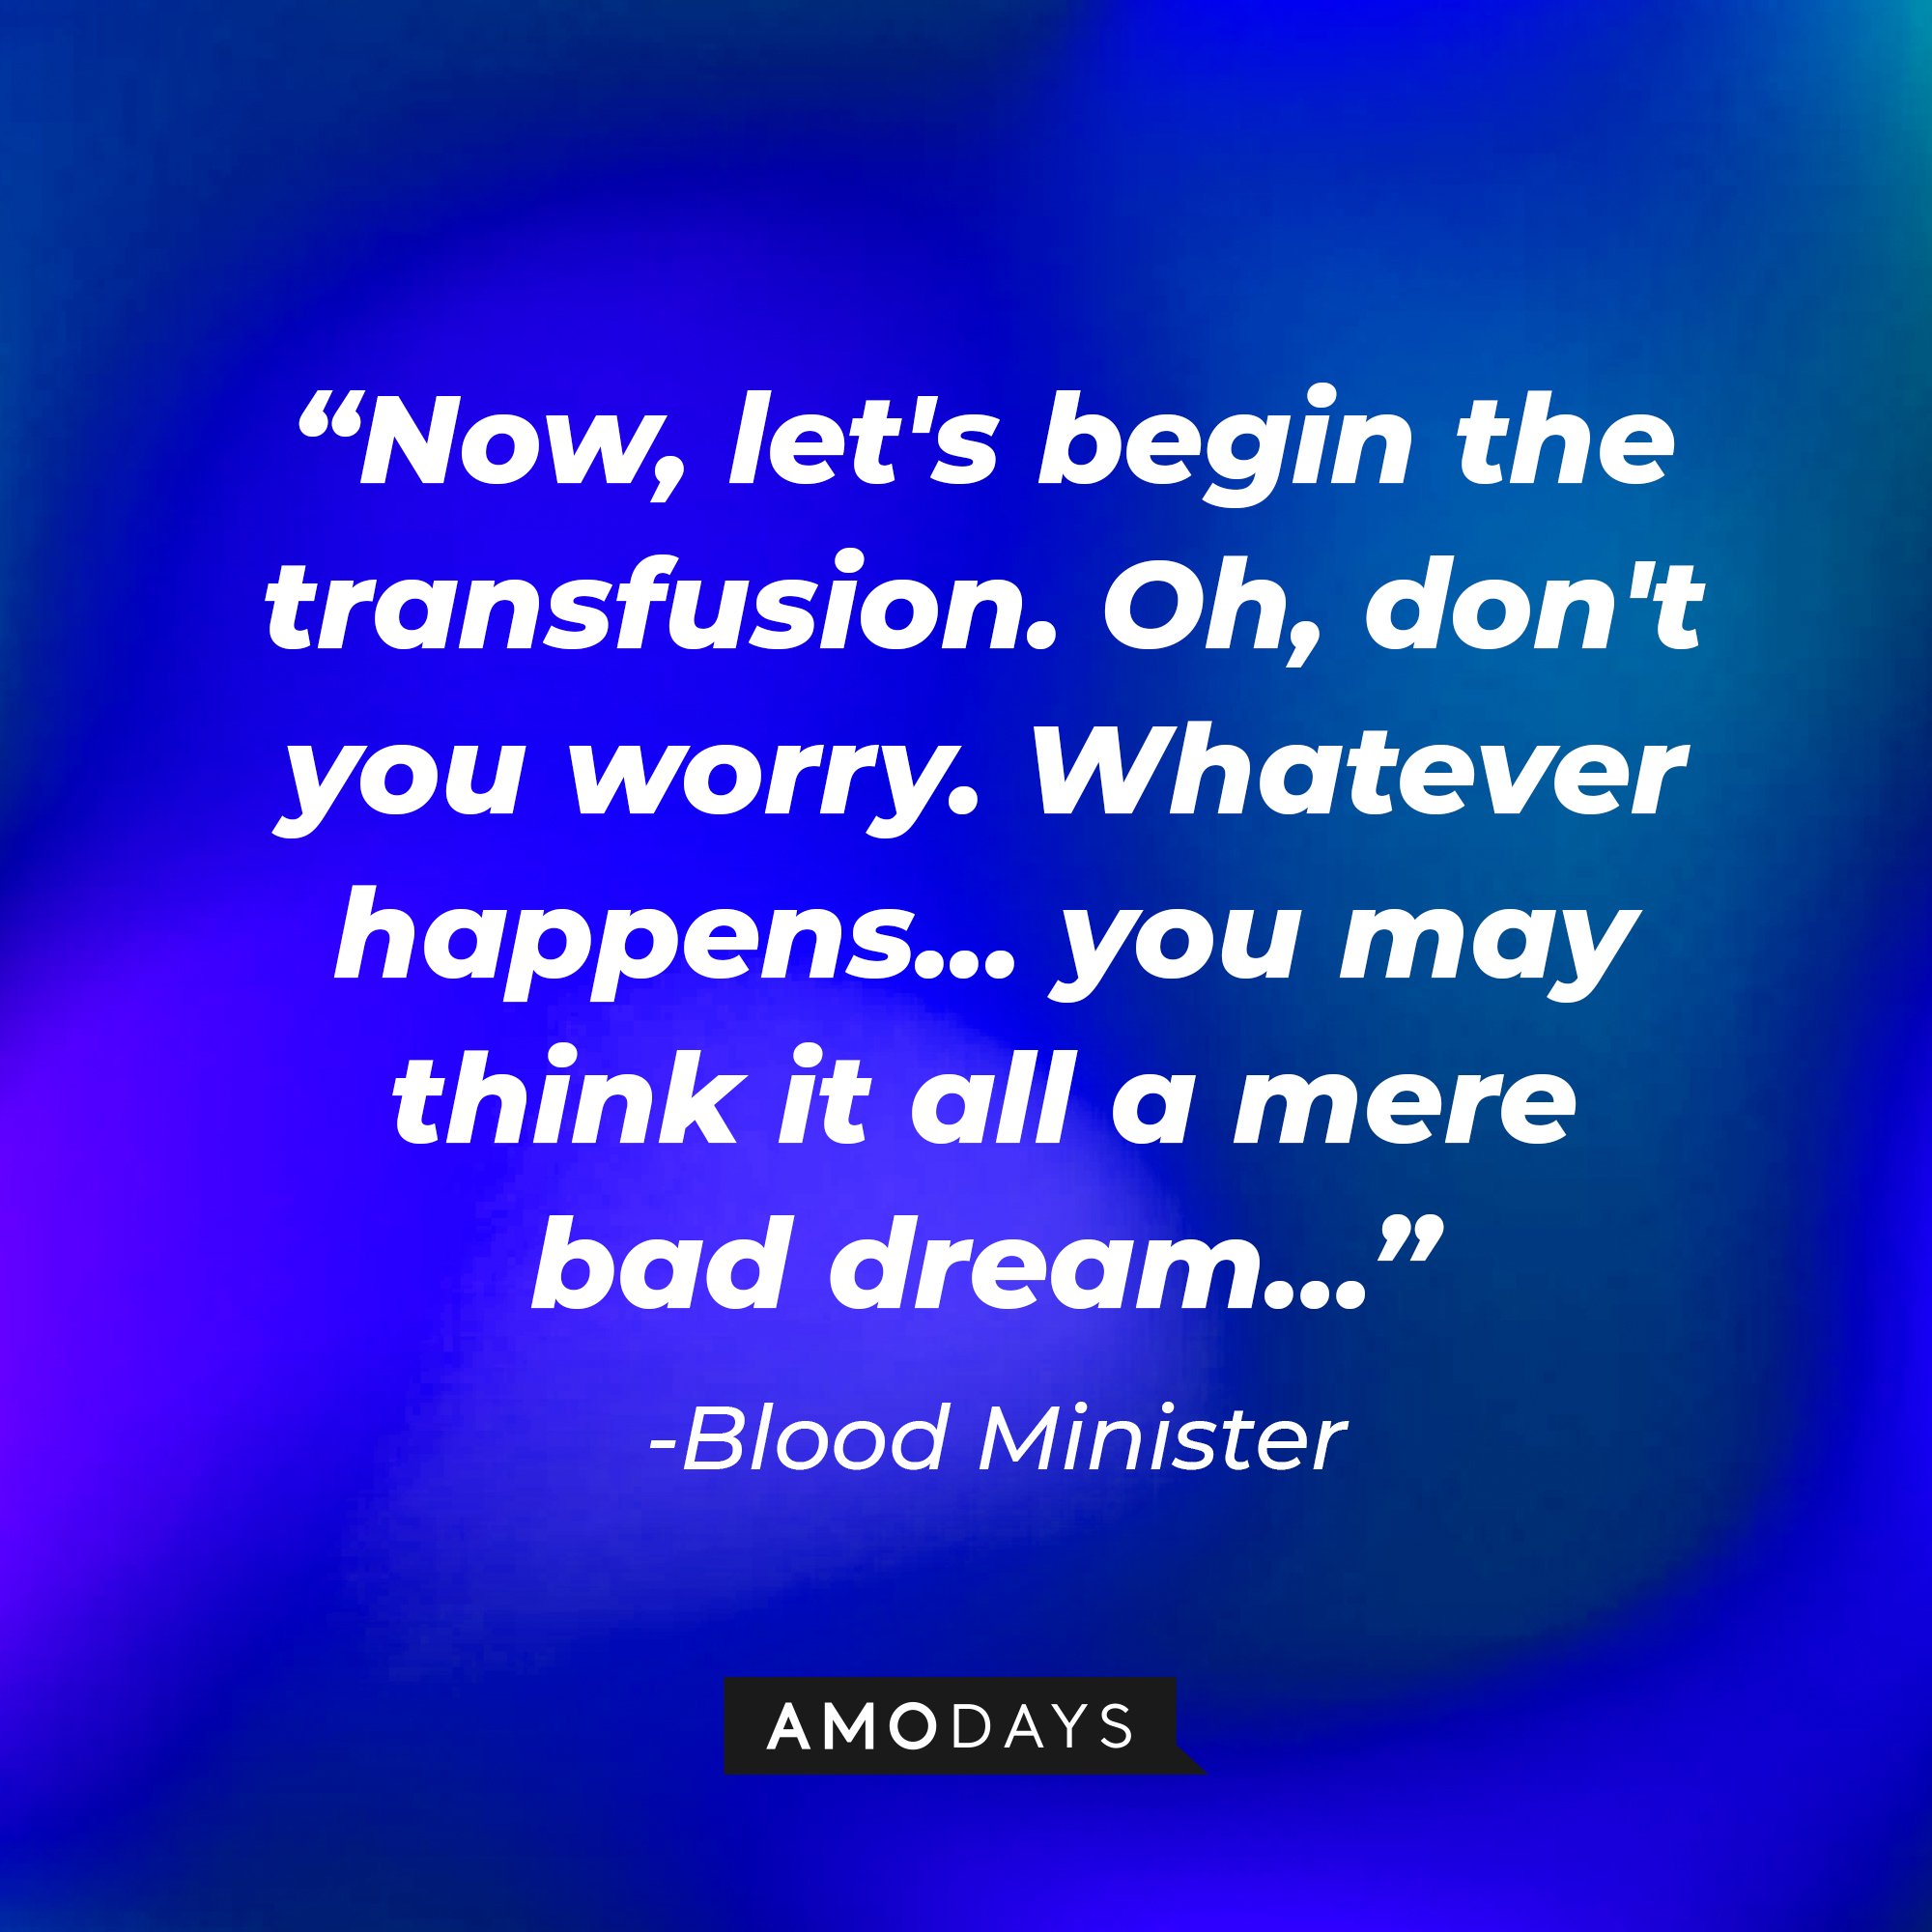  Blood Minister’s quote: "Now, let's begin the transfusion. Oh, don't you worry. Whatever happens... you may think it all a mere bad dream…" | Image: AmoDays